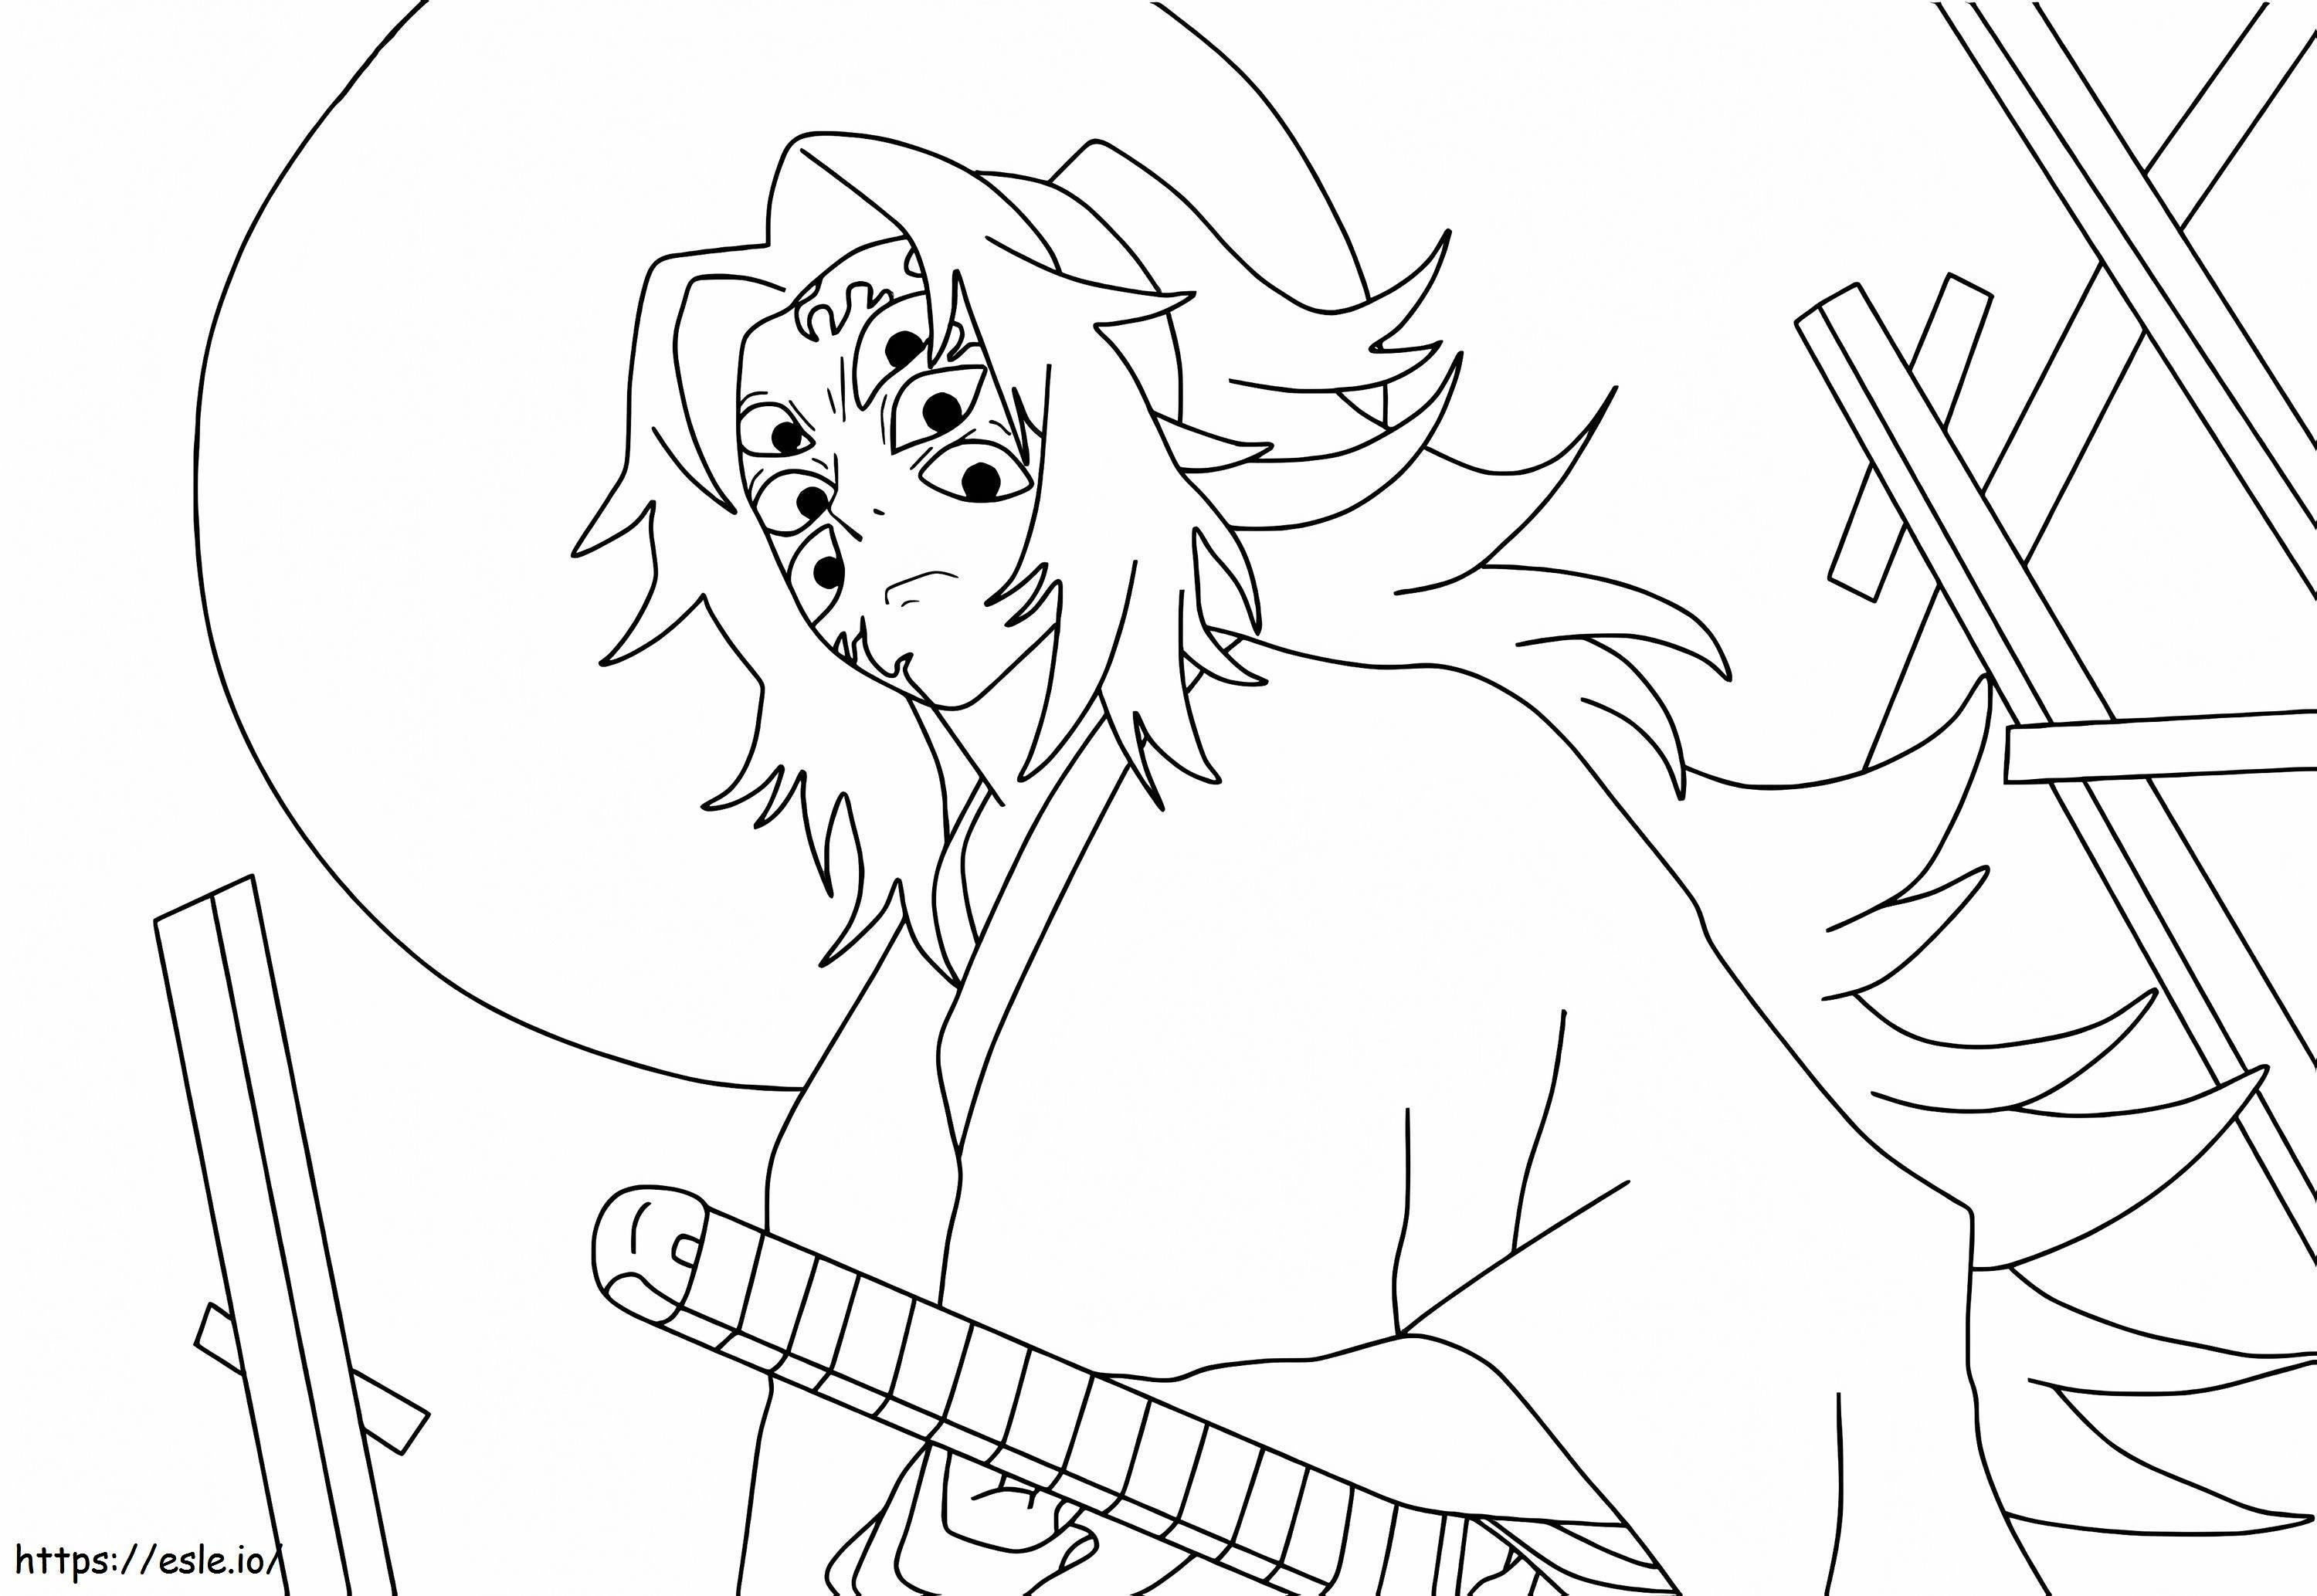 Of Course coloring page